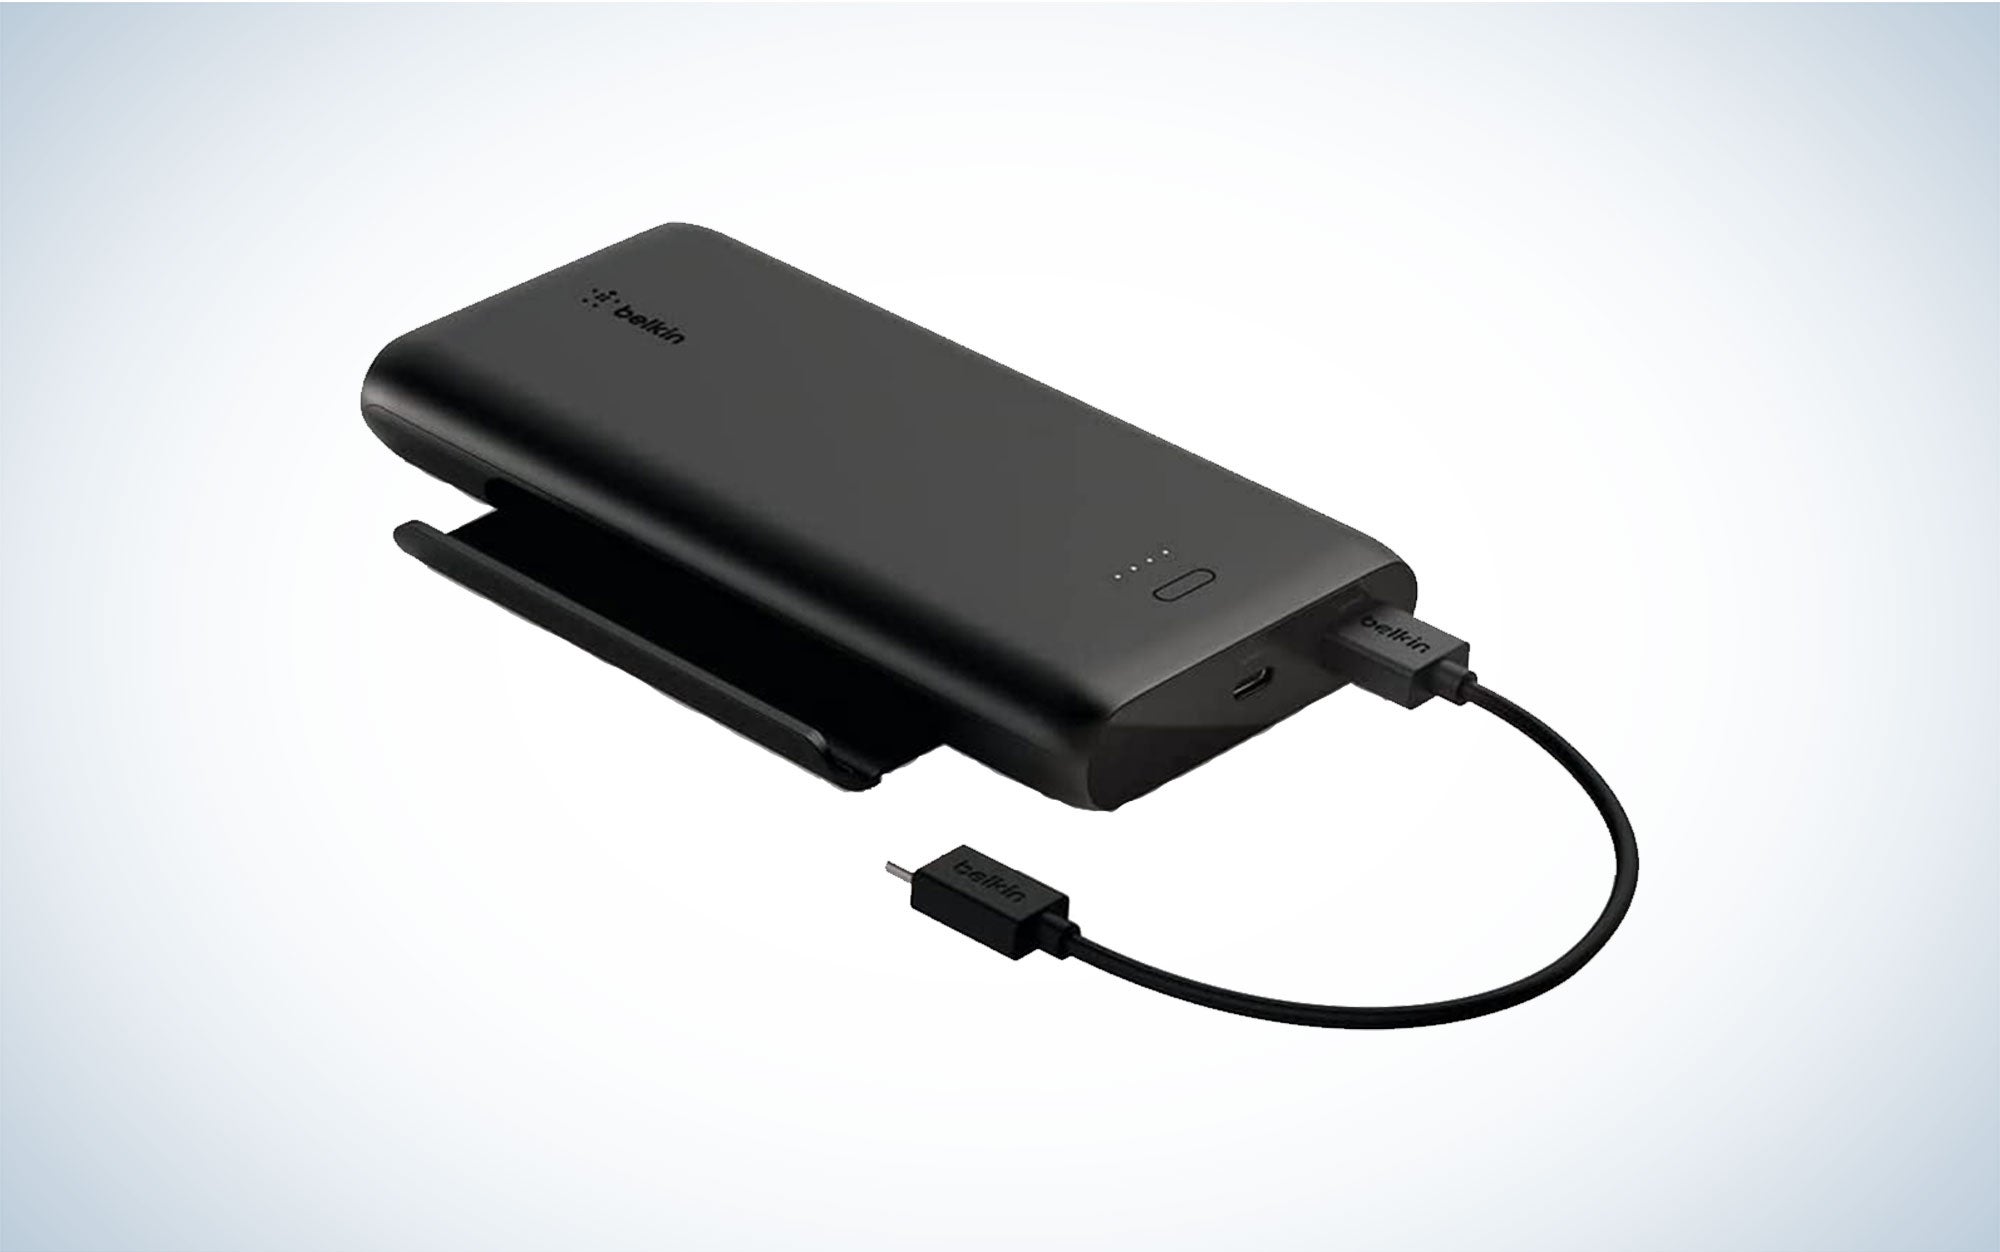 Belkin Gaming Power Bank is the best portable charger.